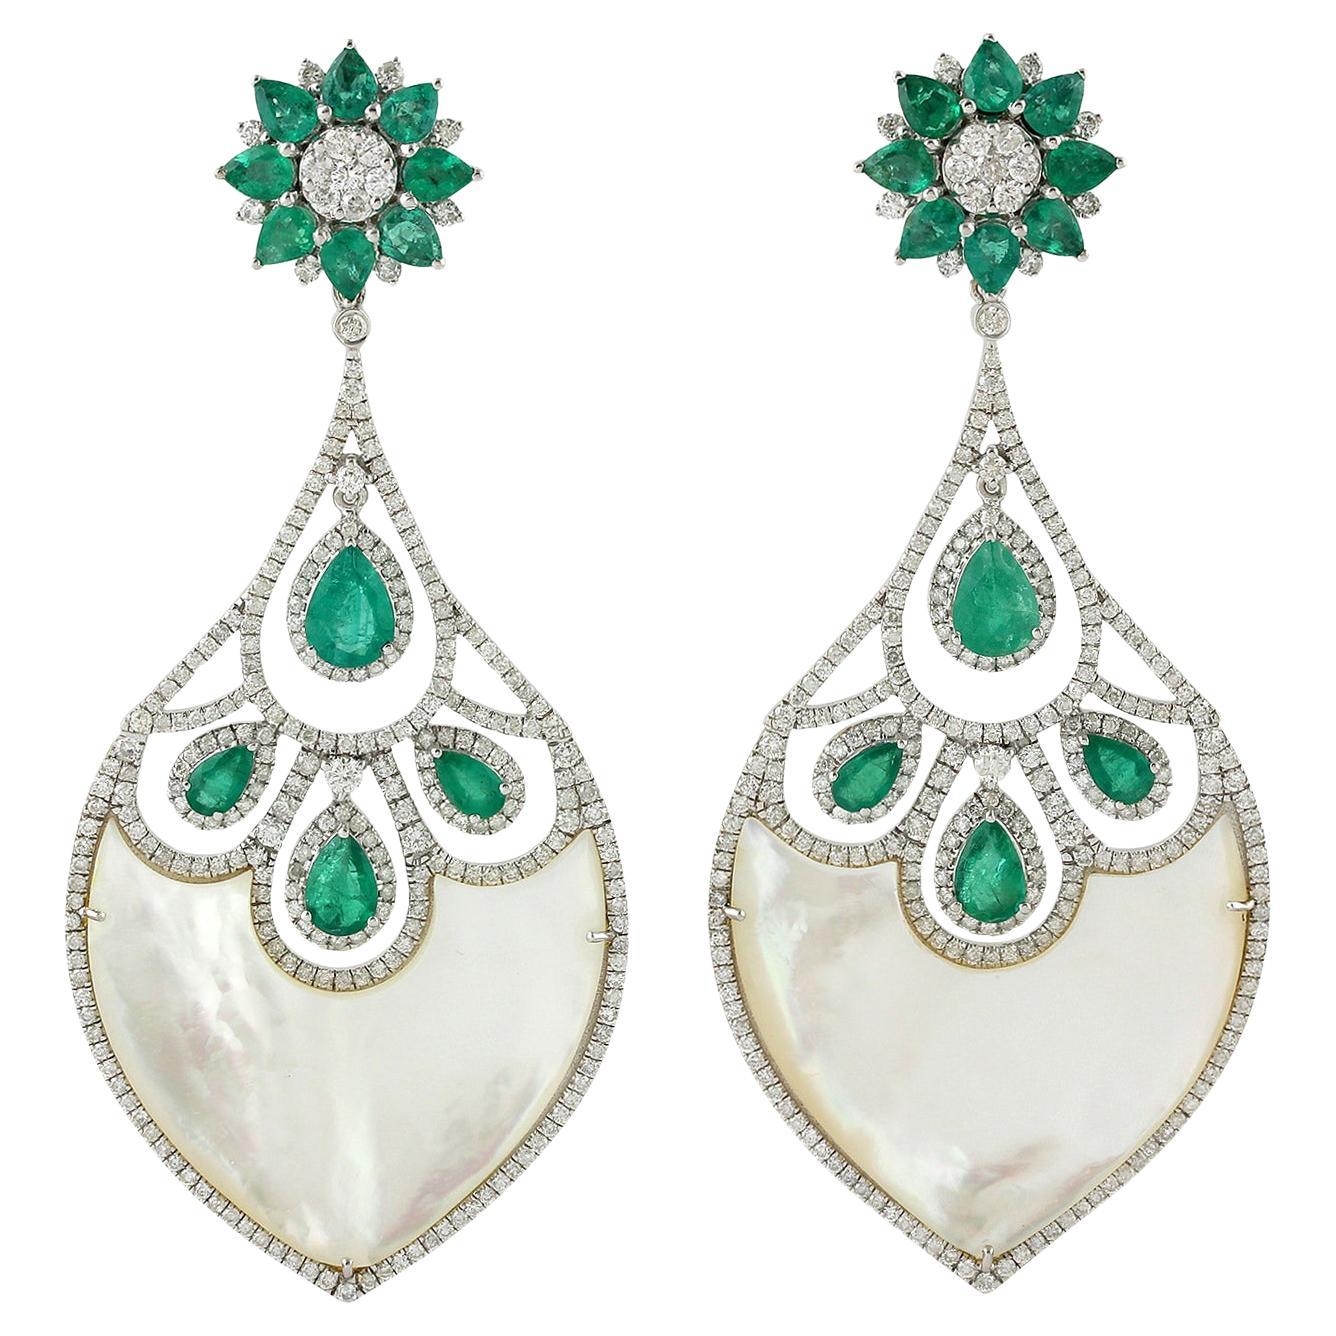 20.70ct Pearl Dangle Earrings With Emerald & Diamonds Made In 18k White Gold For Sale